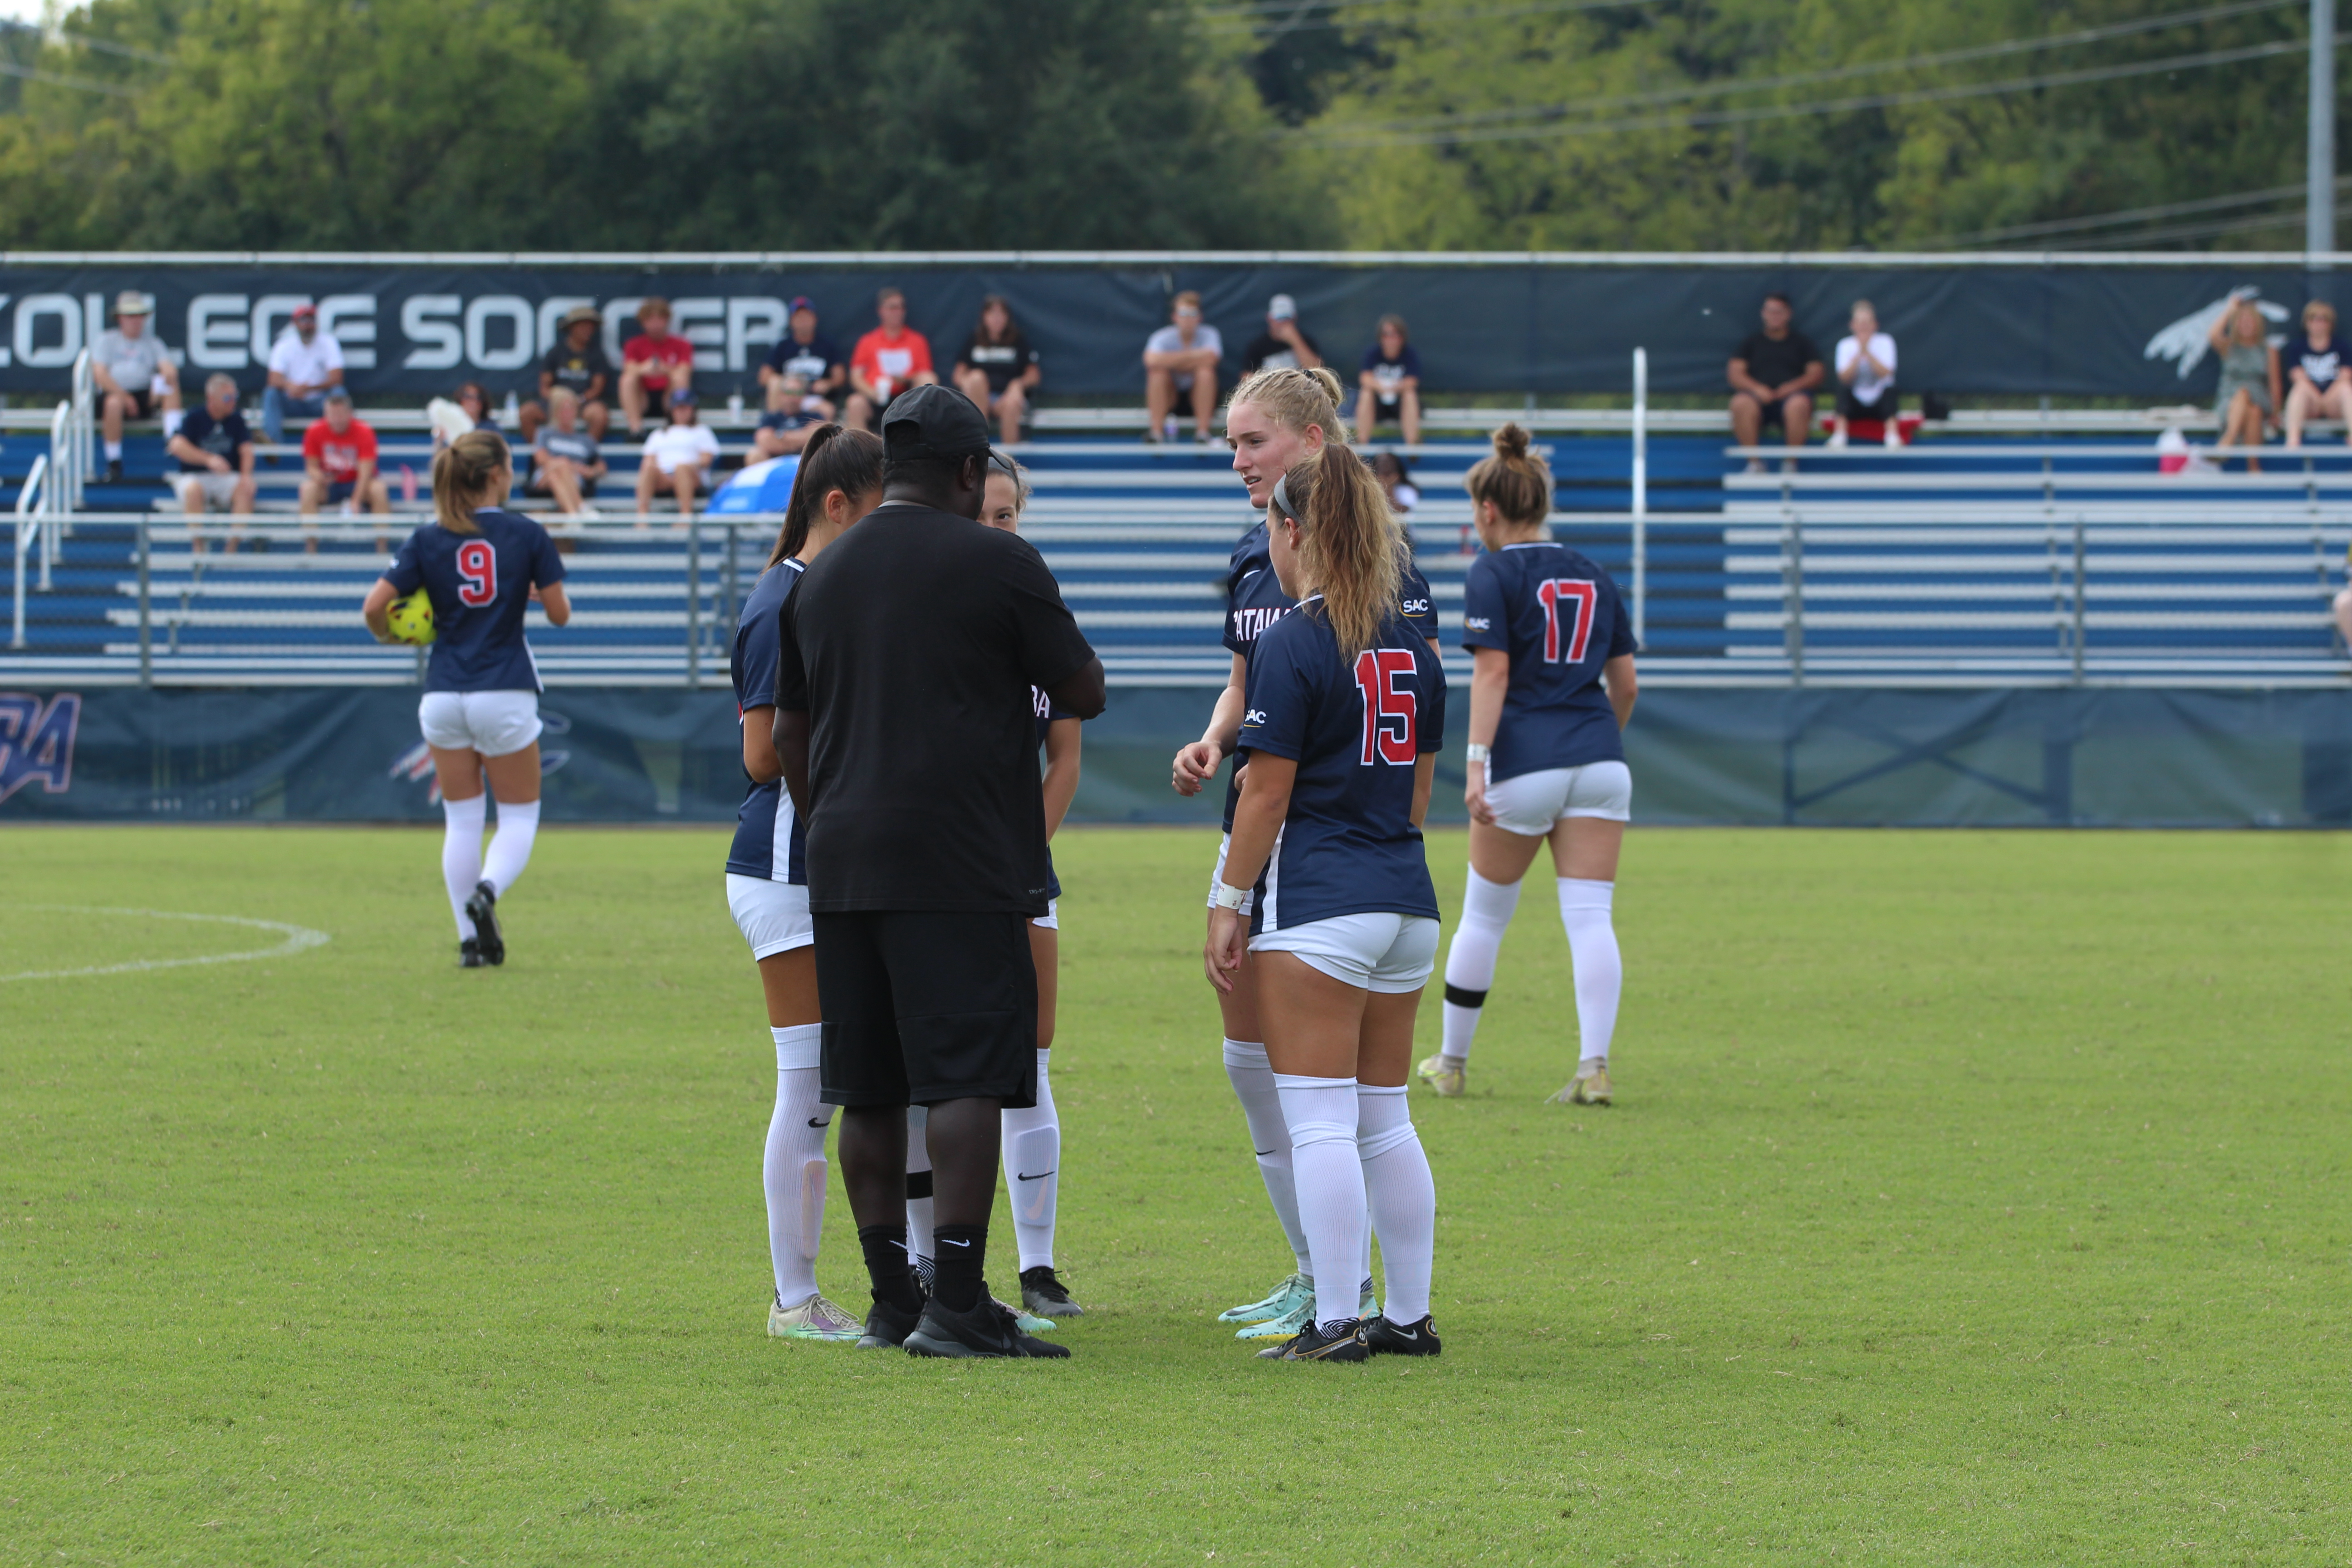 Coach Nick Brown with Women's Soccer Team on field